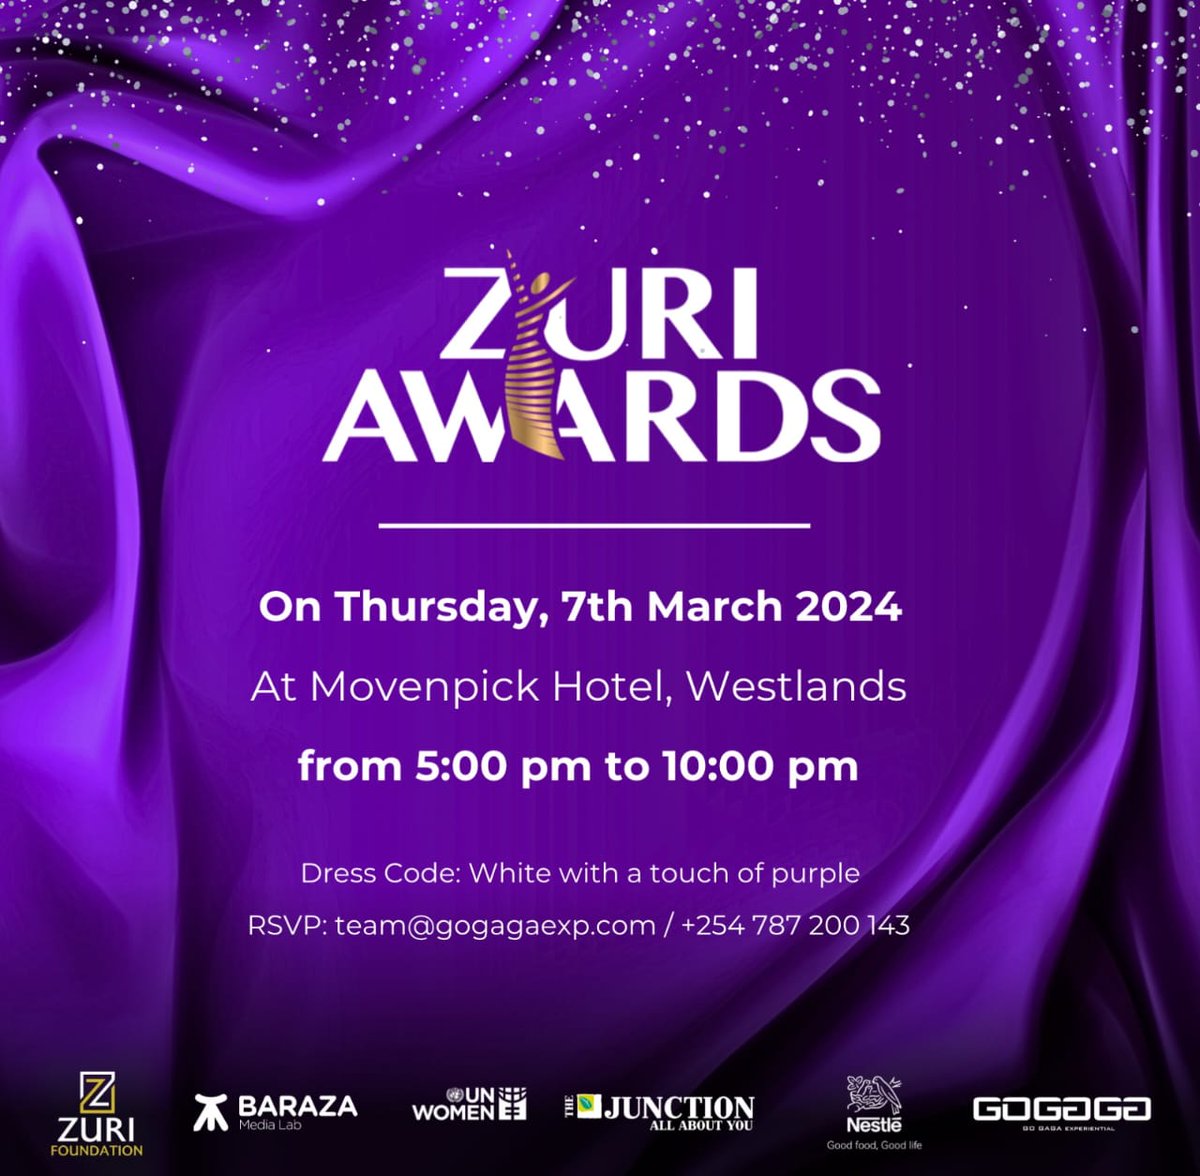 The #ZuriAwards held at Zuri Foundation are a testament to the power of recognition and inclusion among women. Through these awards, we've witnessed the profound transformations that occur when women are empowered and supported.